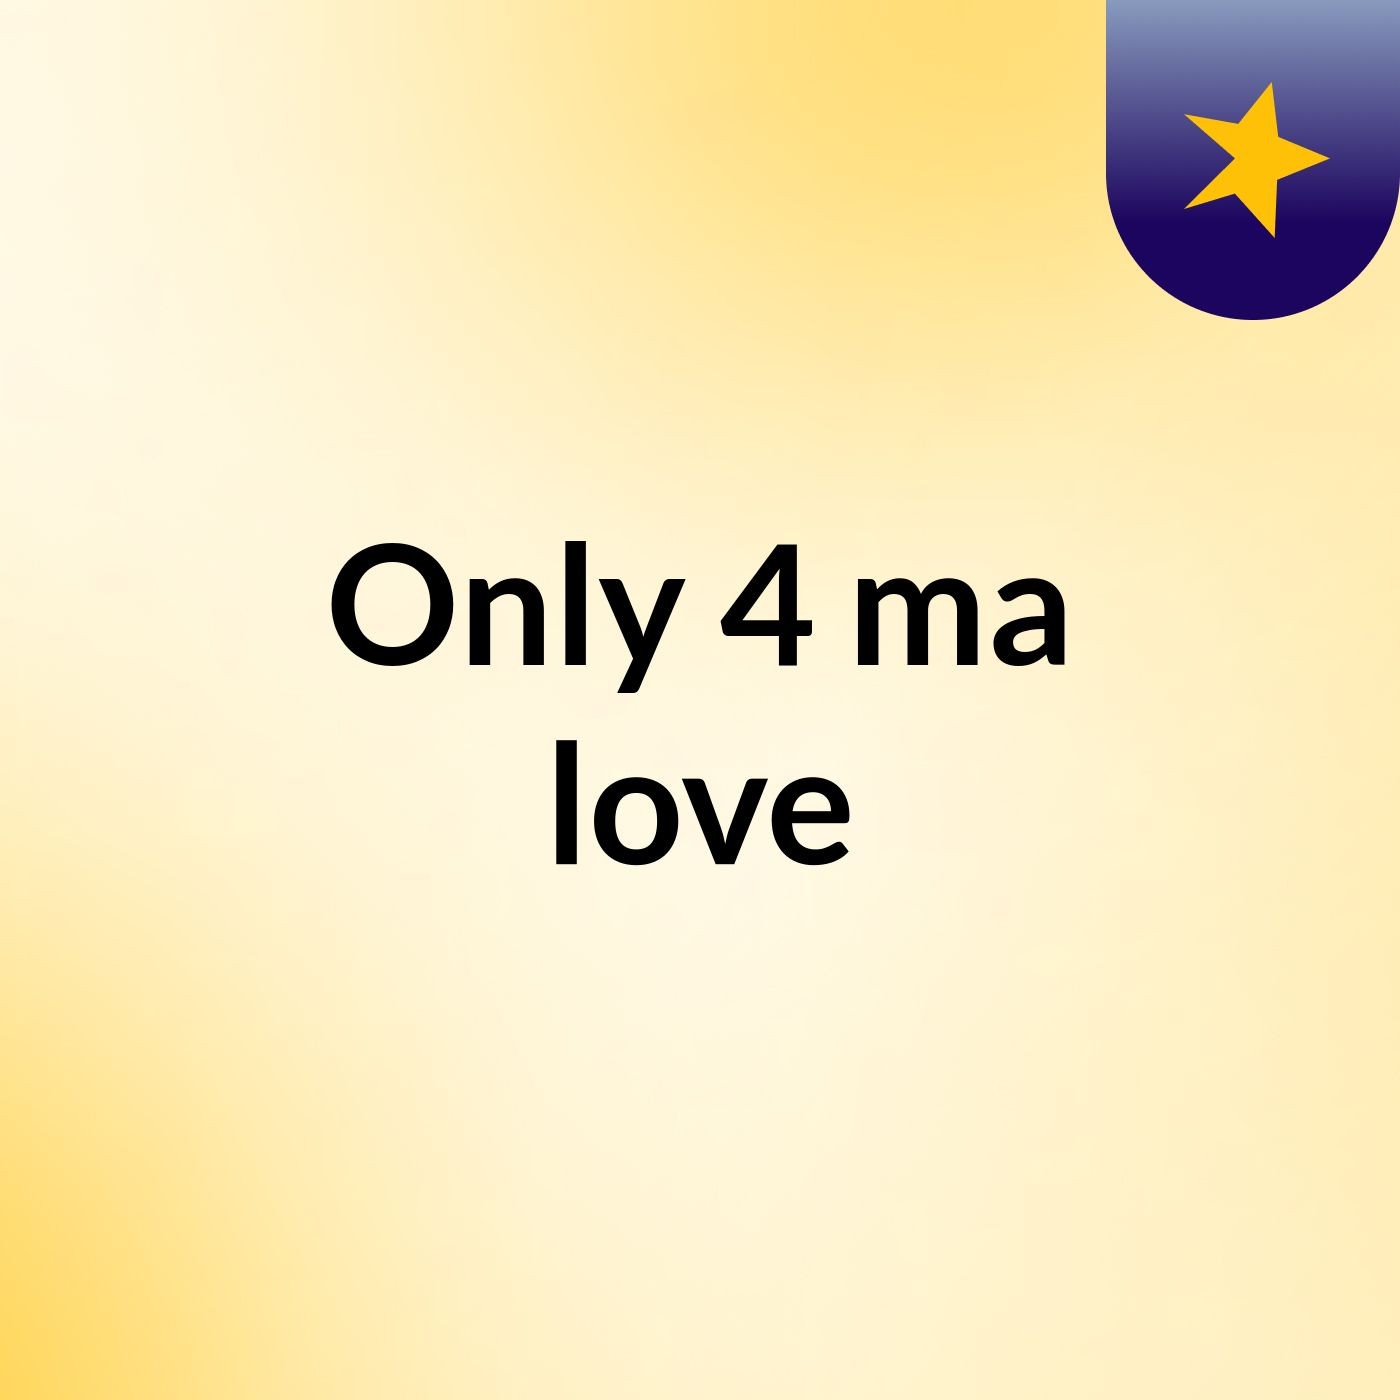 Only 4 ma love